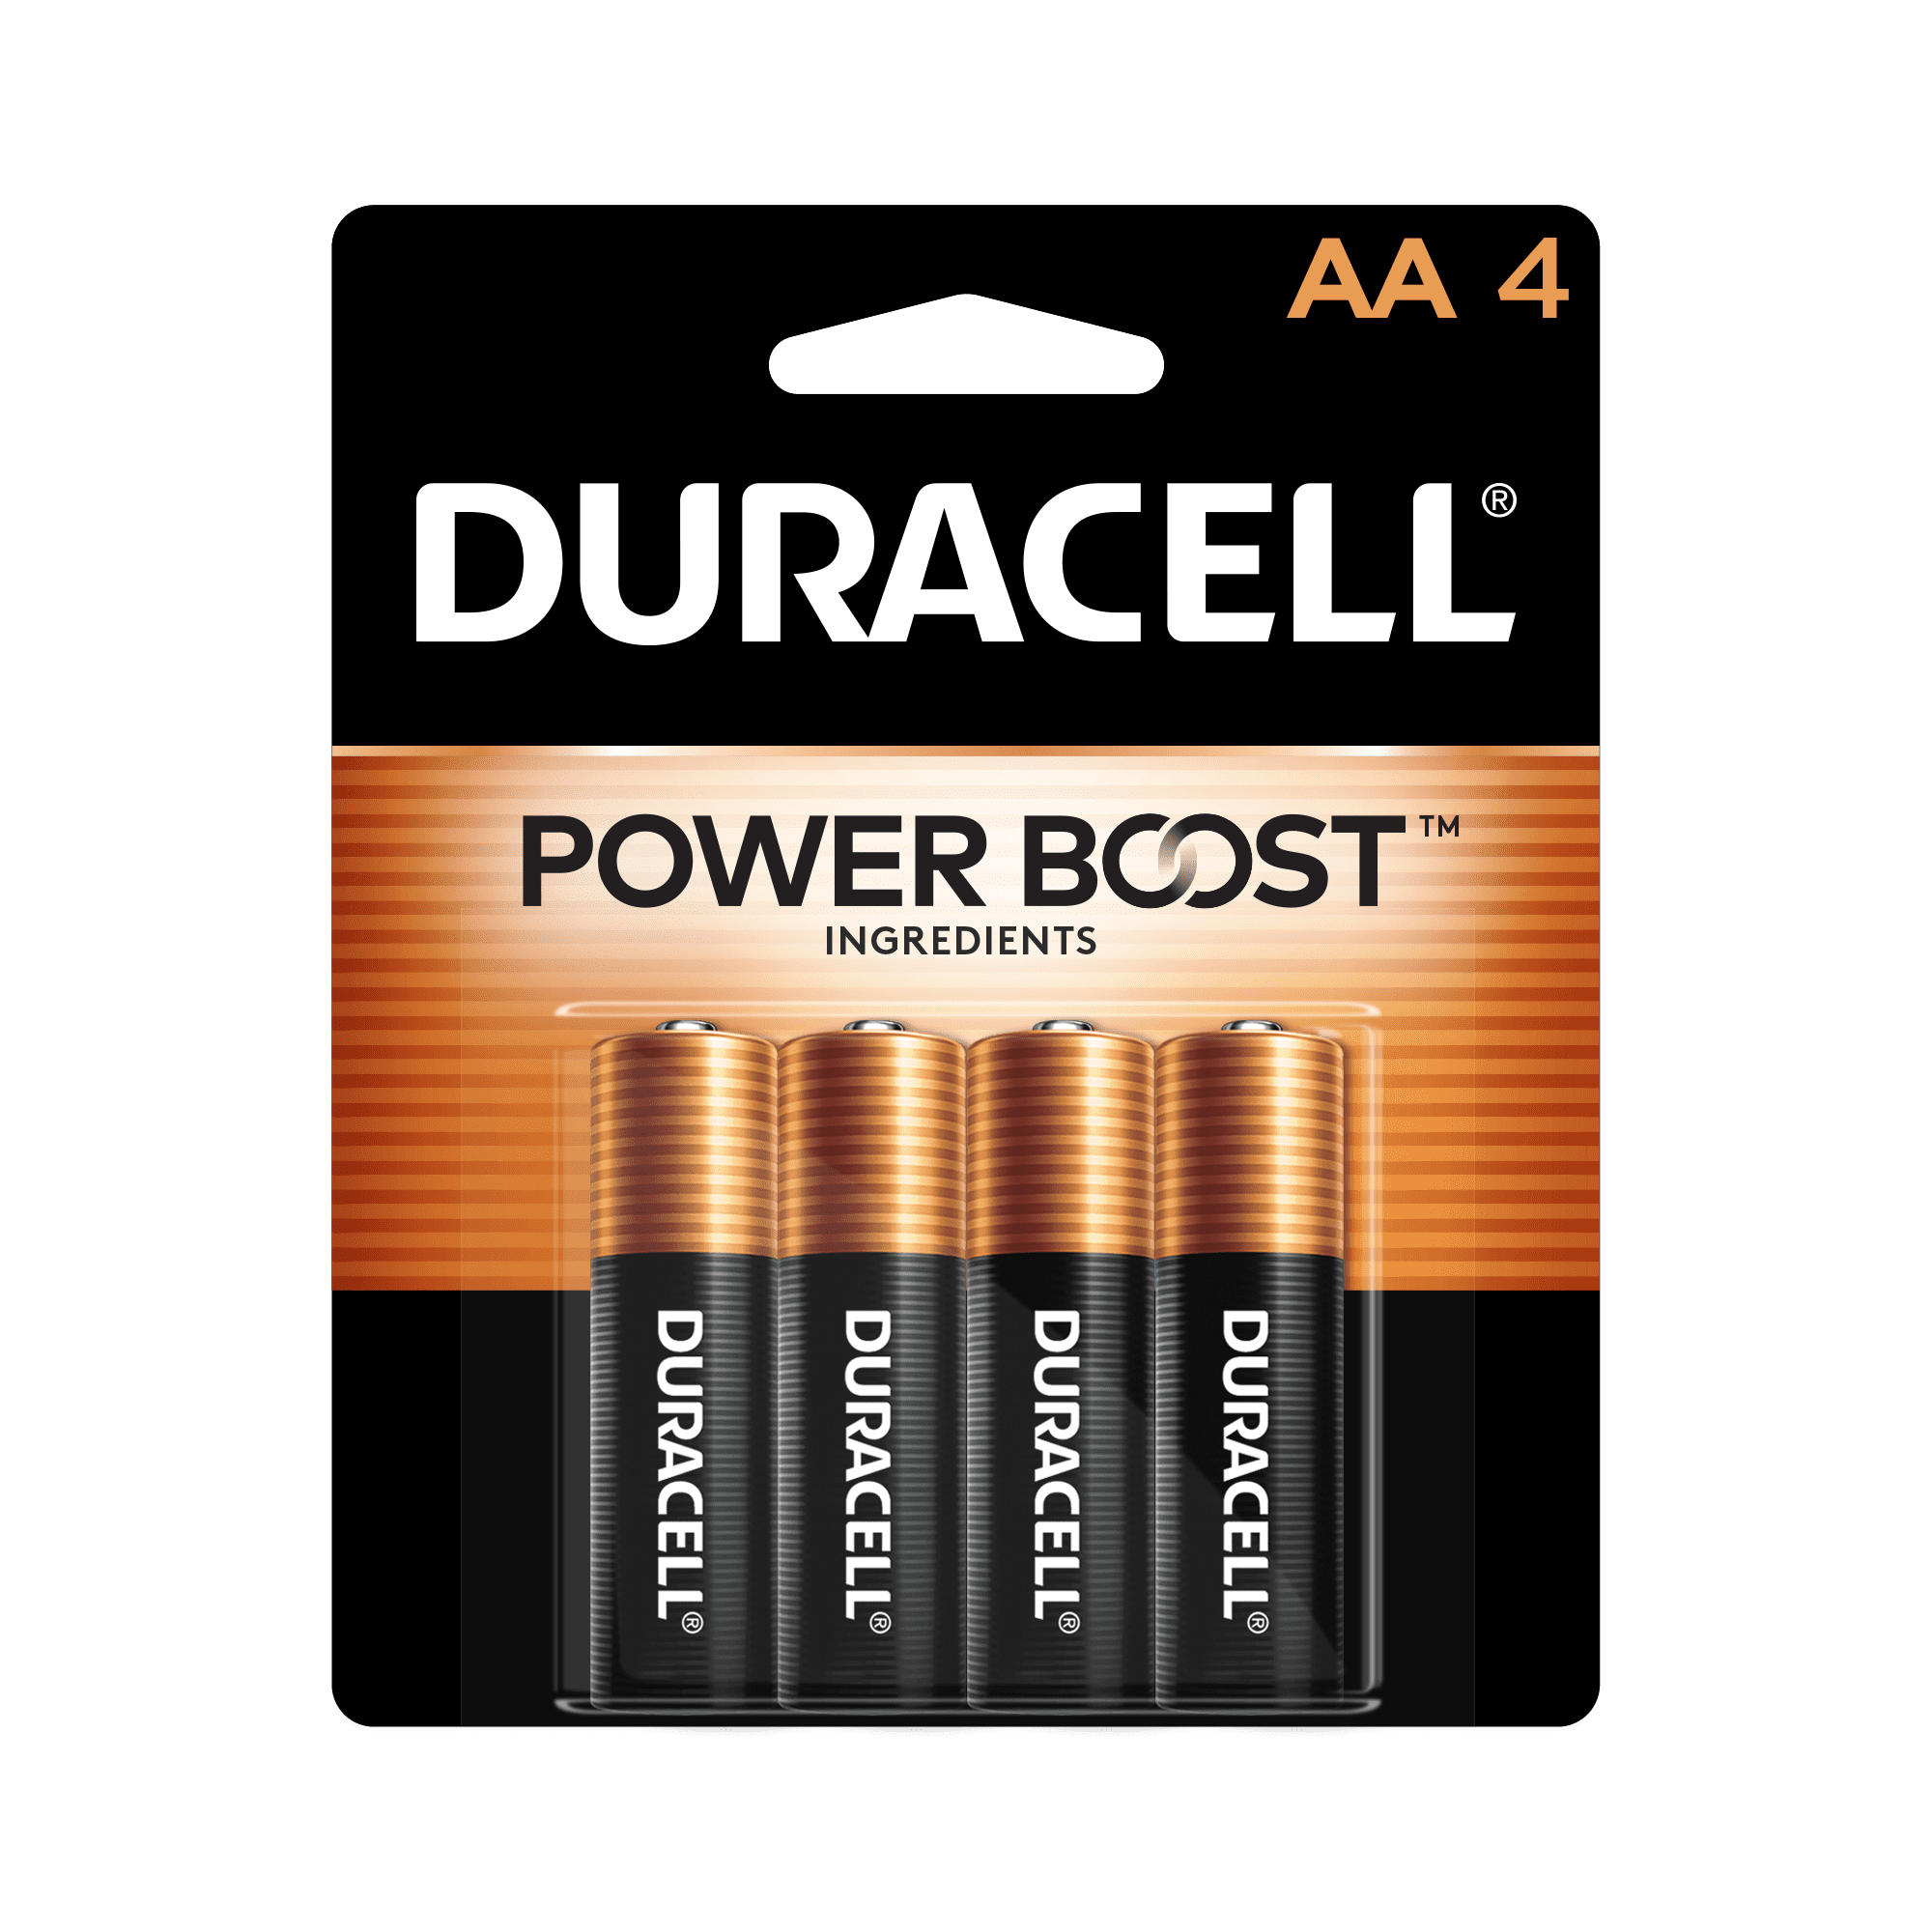 Duracell Coppertop Aa Battery With Power Boost™ 4 Pack Long Lasting